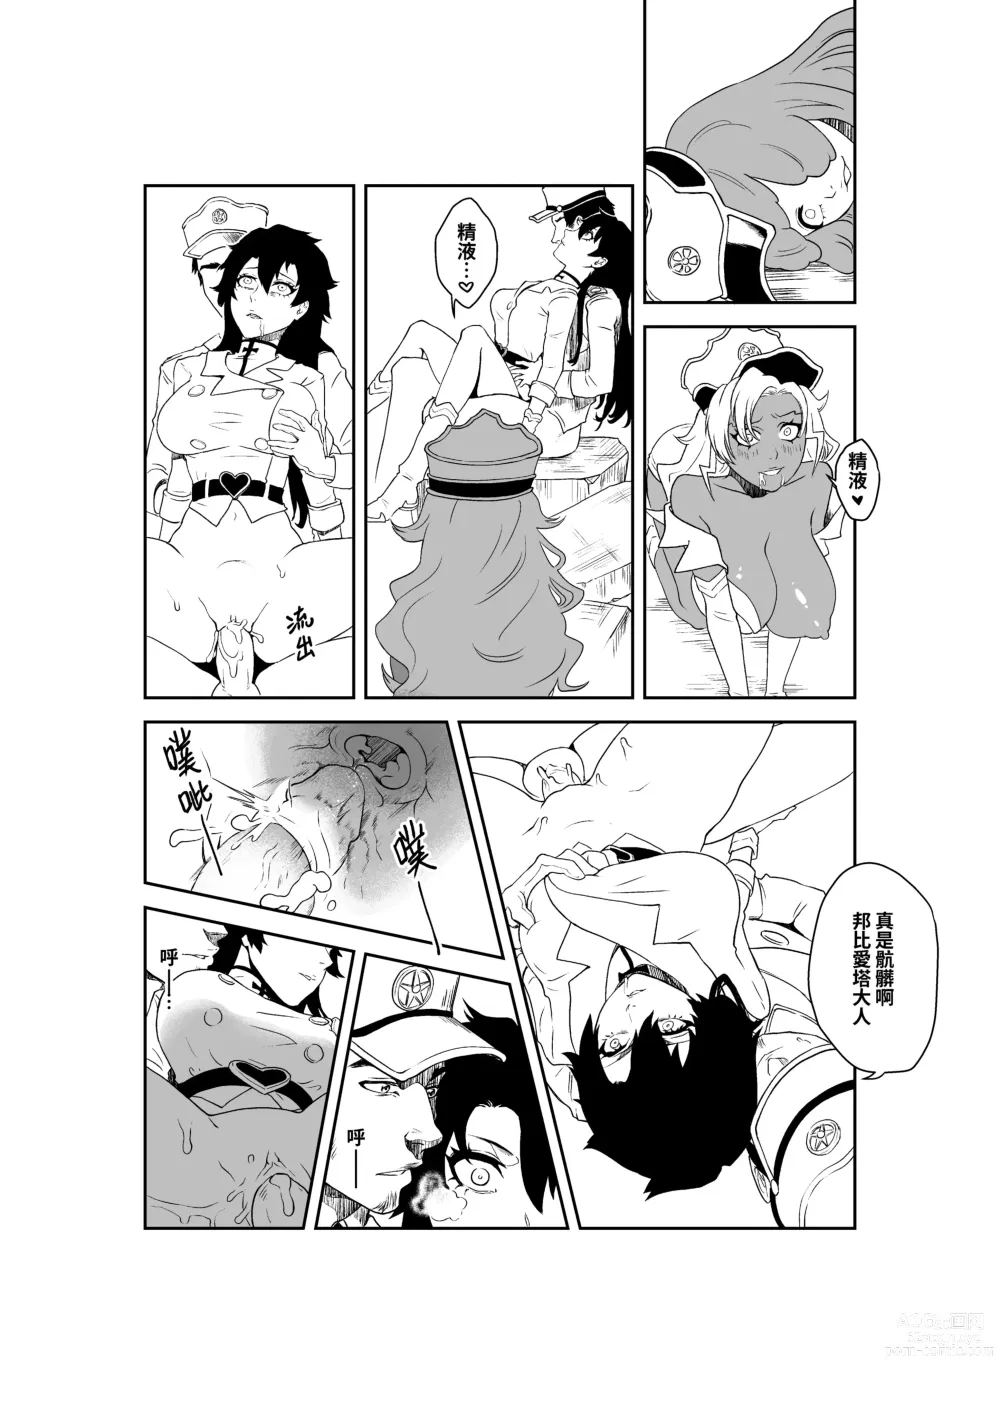 Page 17 of doujinshi Grim Reaper (18P) Bambietta/Candice Ft. Giselle Smelly Semen